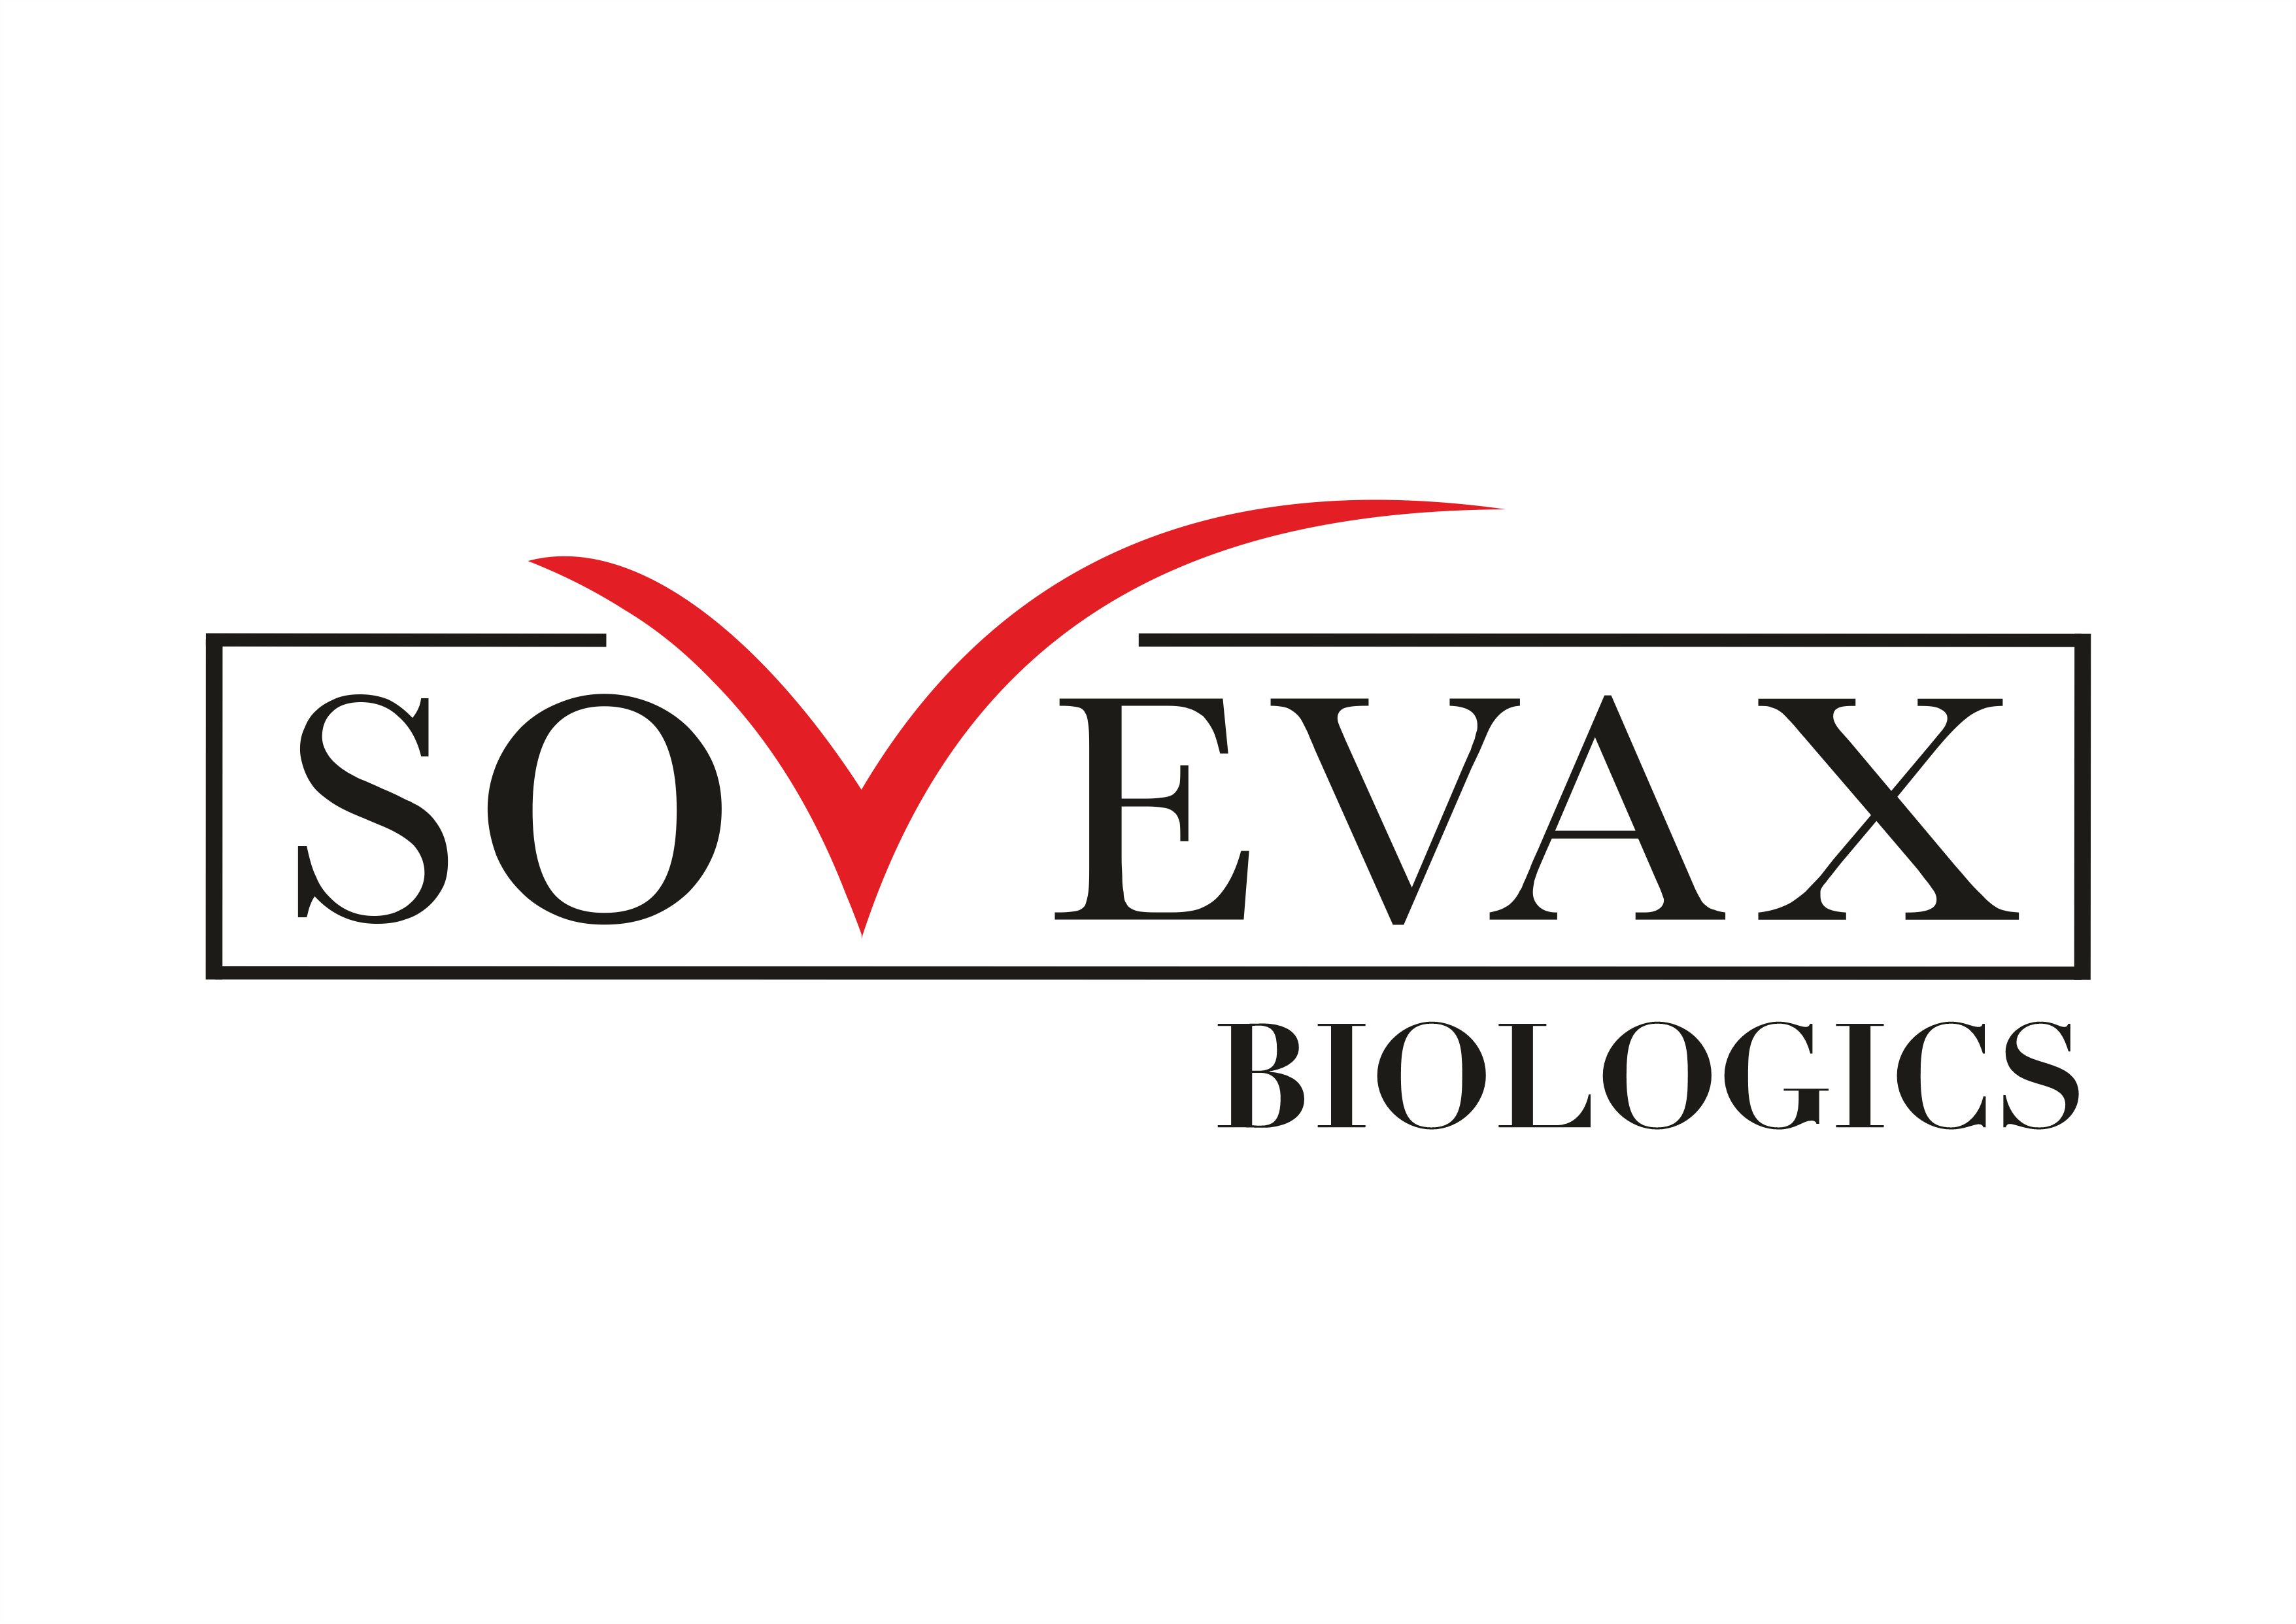 Sovevax Biologics Private Limited